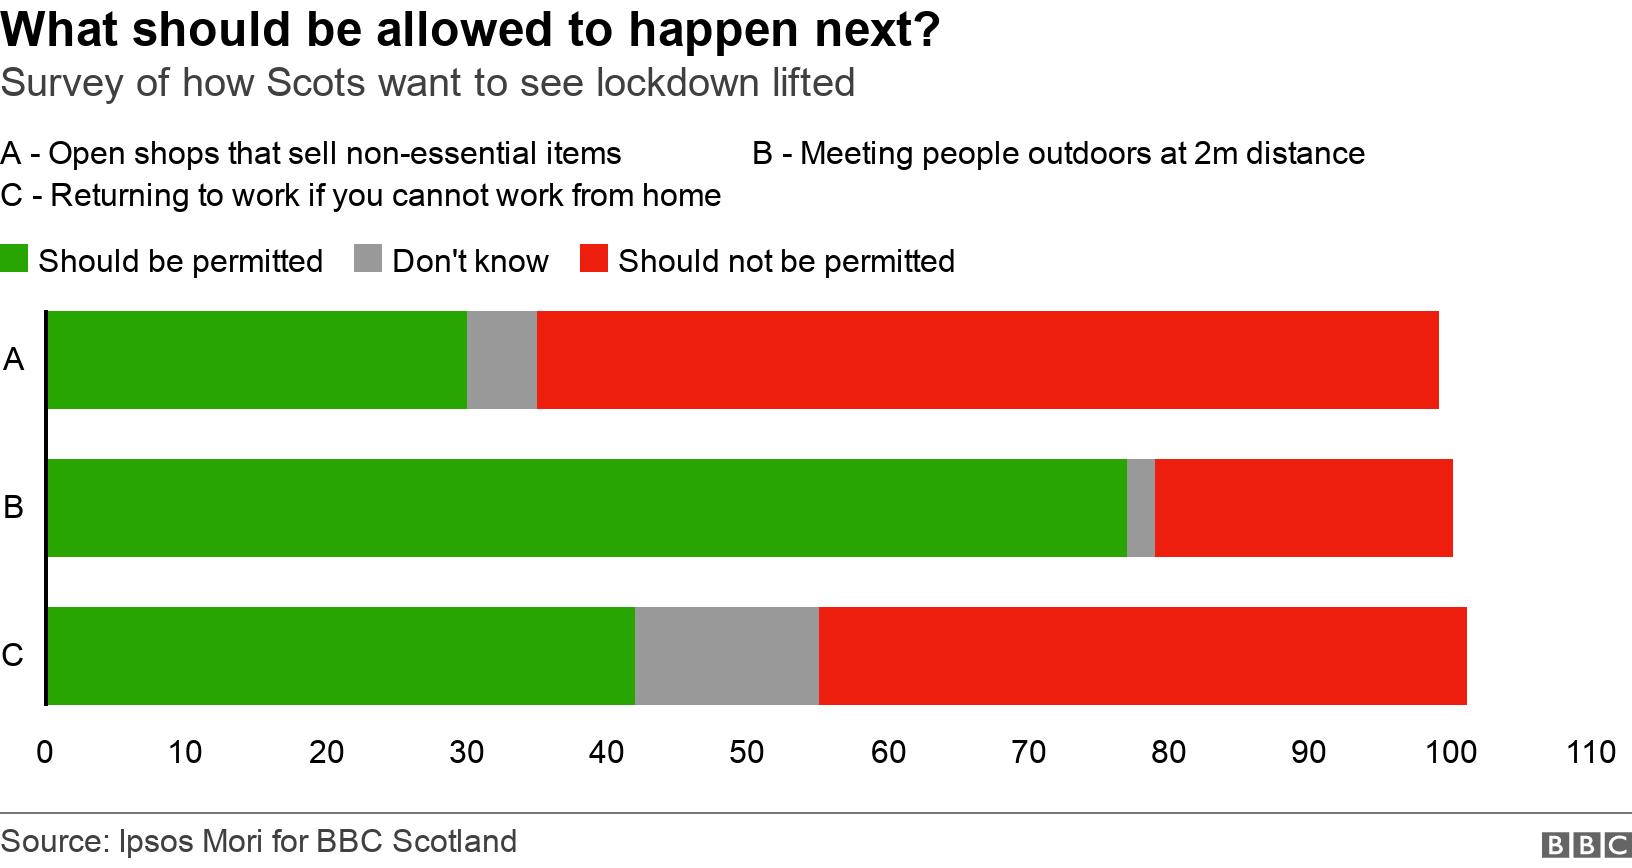 What should be allowed to happen next?. Survey of how Scots want to see lockdown lifted. The majority back allowing people to meet outdoors, at a 2m distance, while many oppose re-opening non-essential shops and people are split on returning to workplaces .